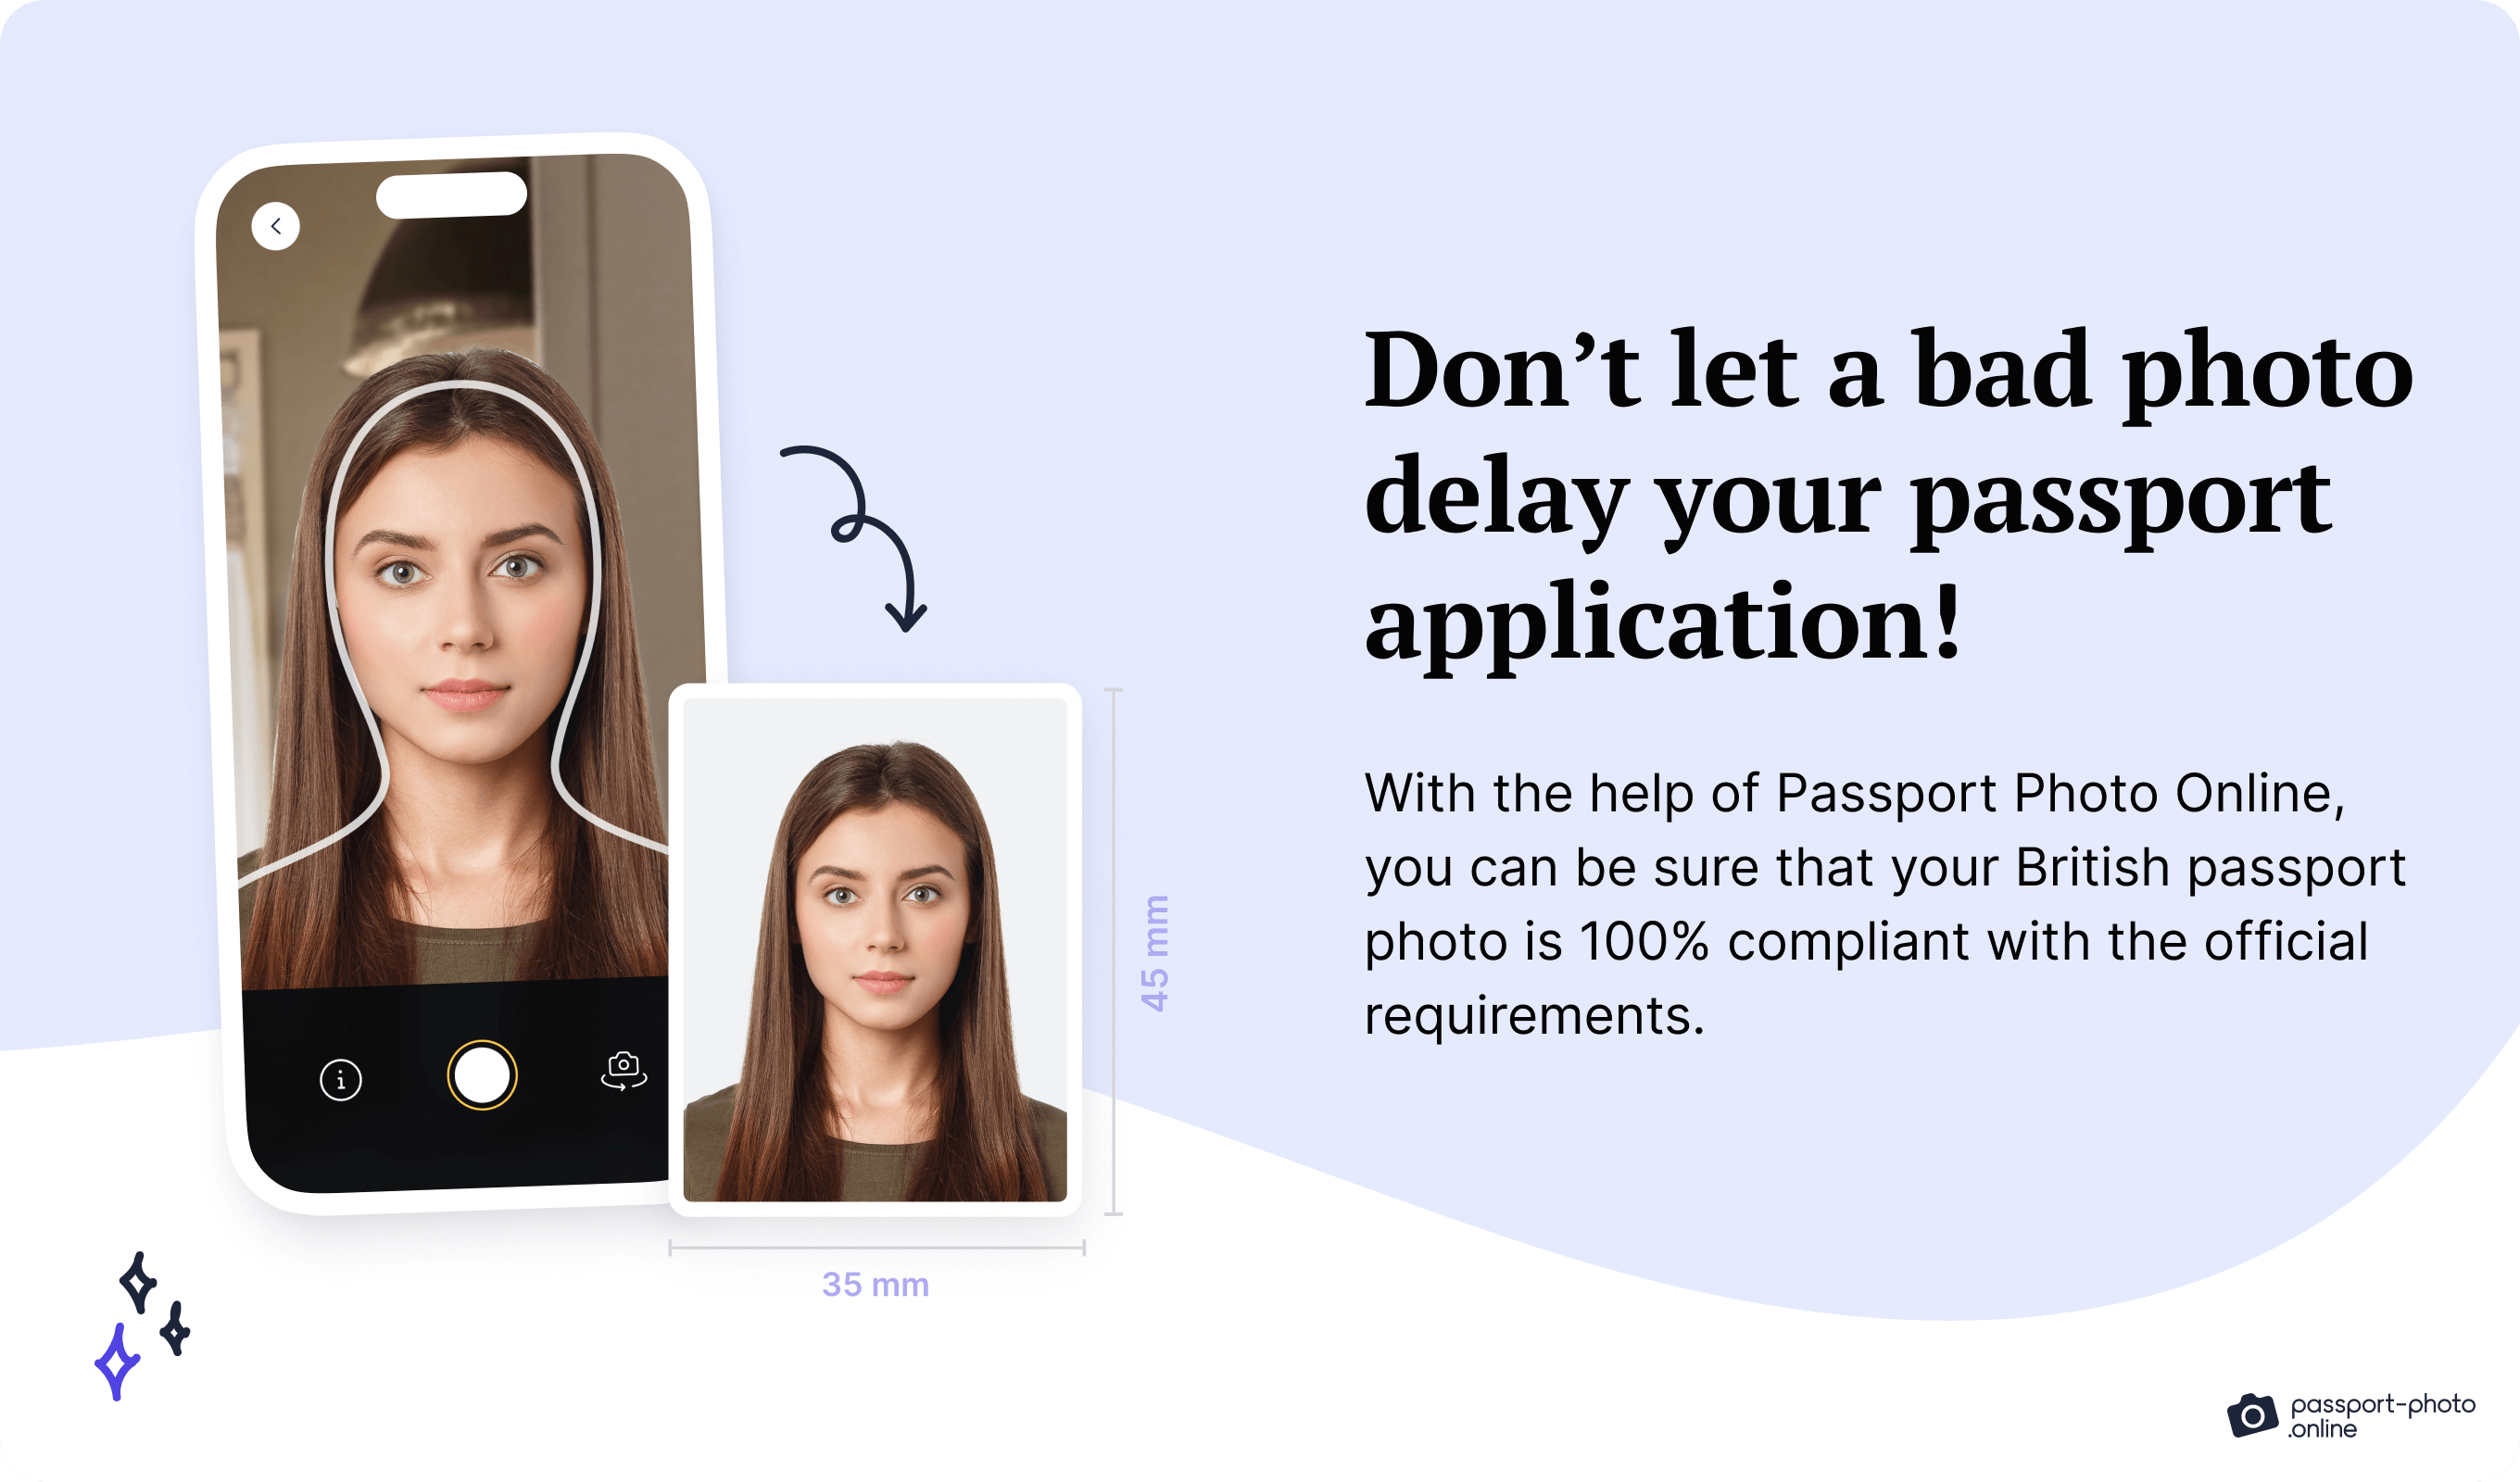 The Passport Photo Online service for your perfect UK passport photo.